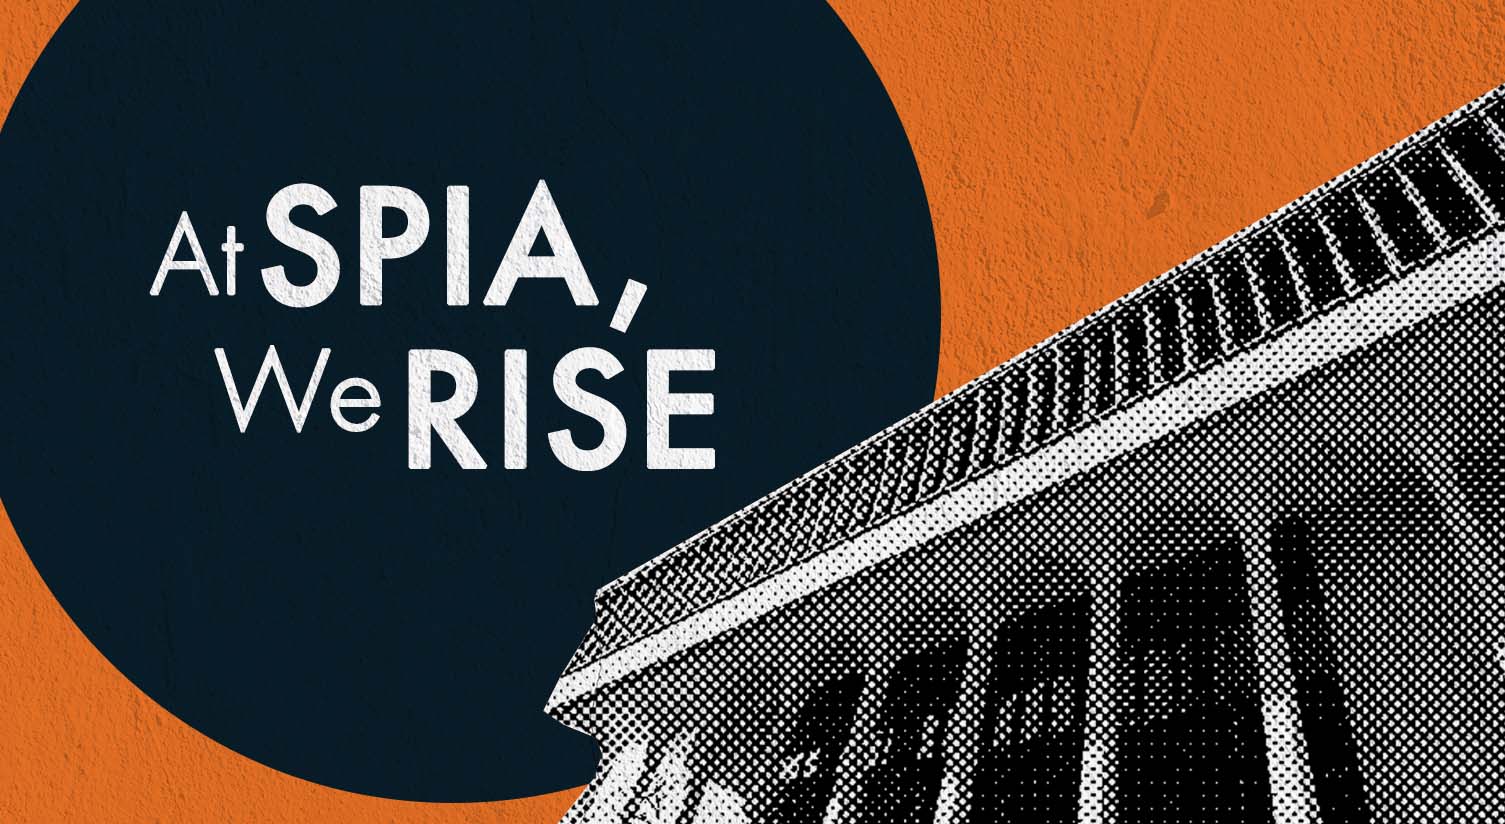 At SPIA, We Rise